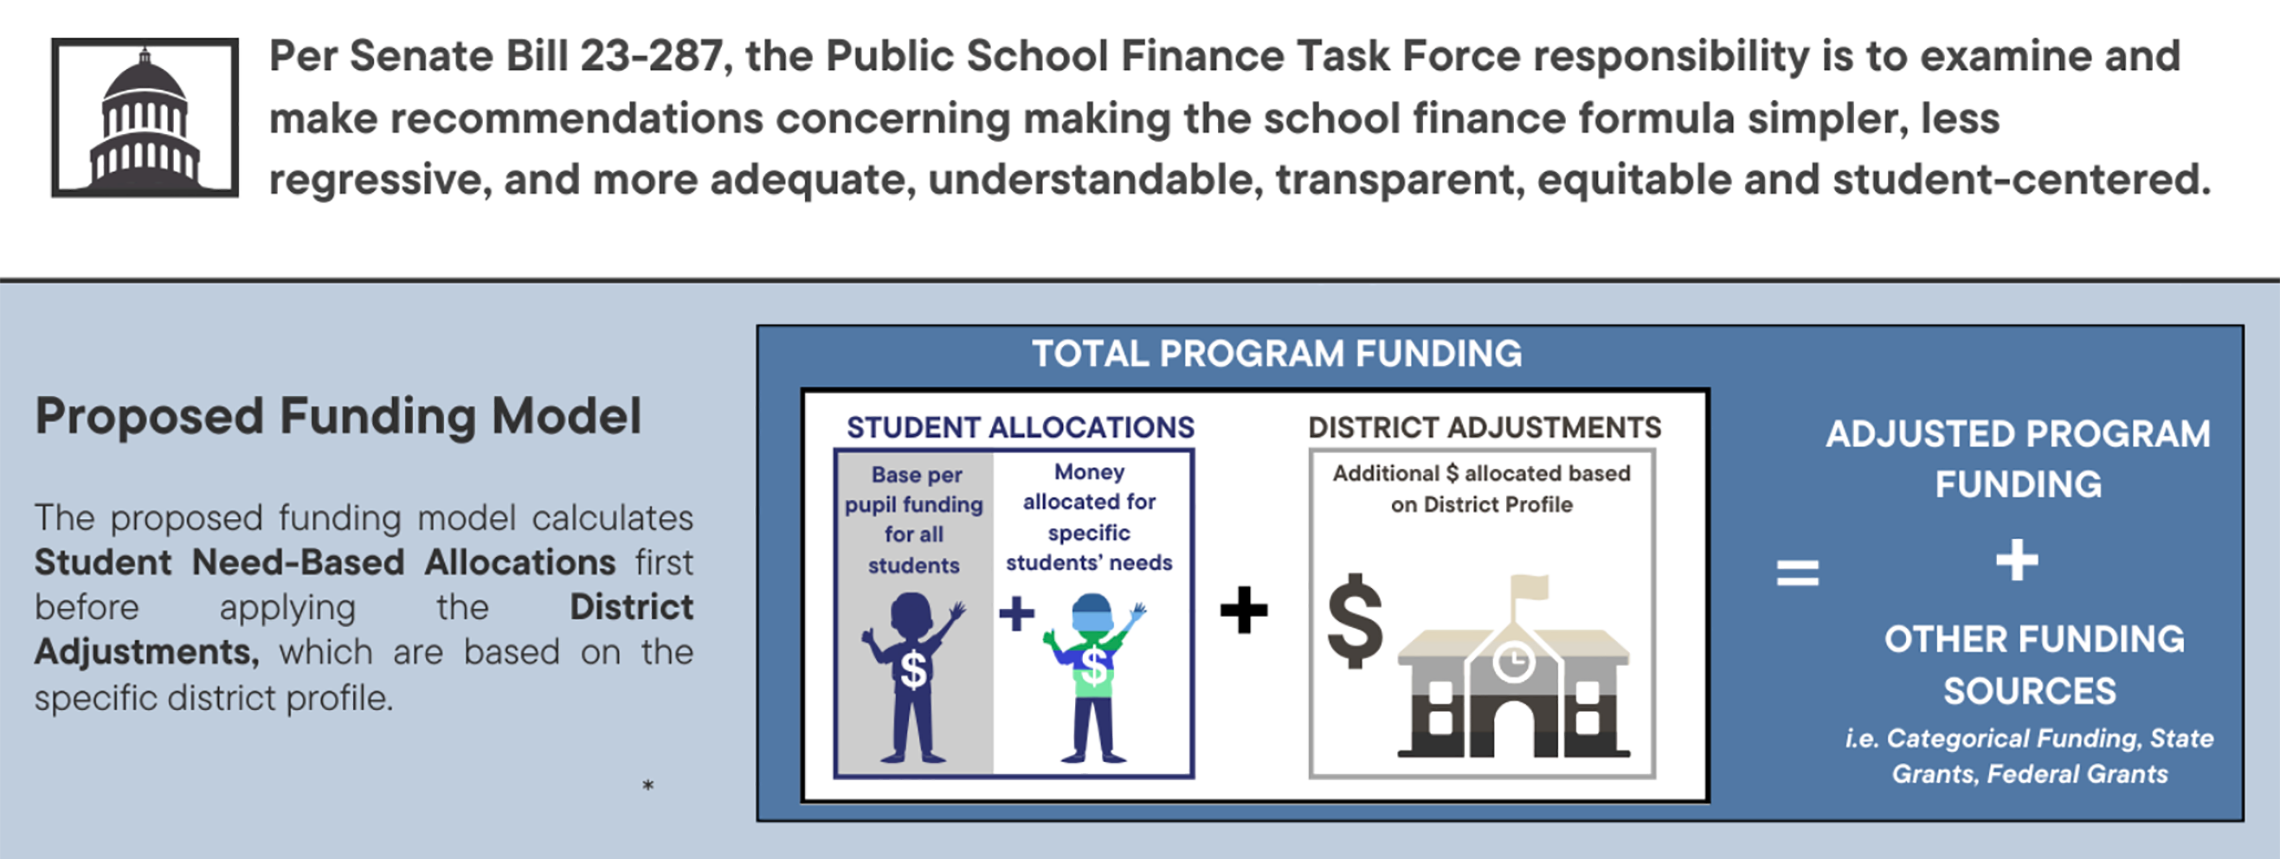 Diagram from the Colorado Public School Finance Task Force showing a proposed funding model.